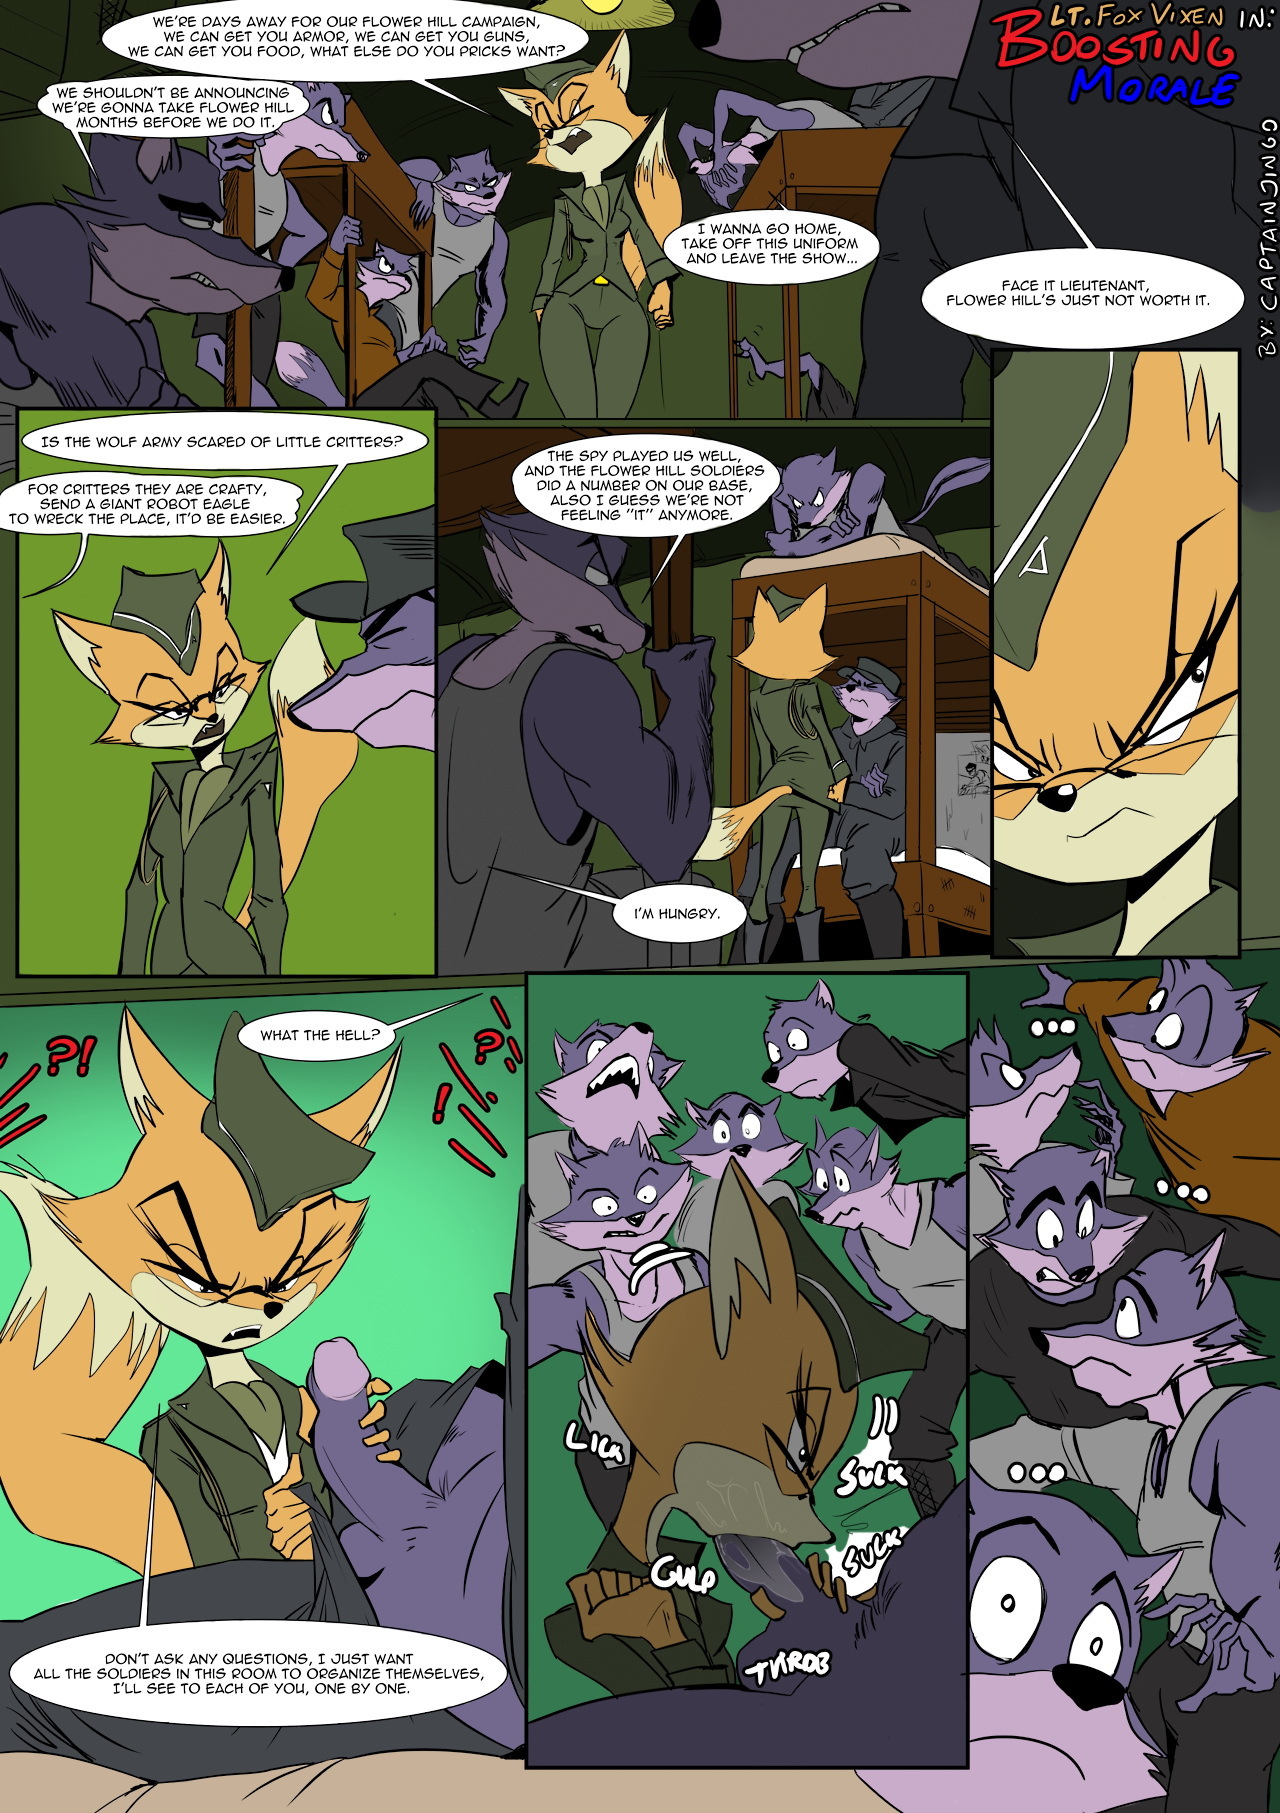 Boosting morale - Page 1